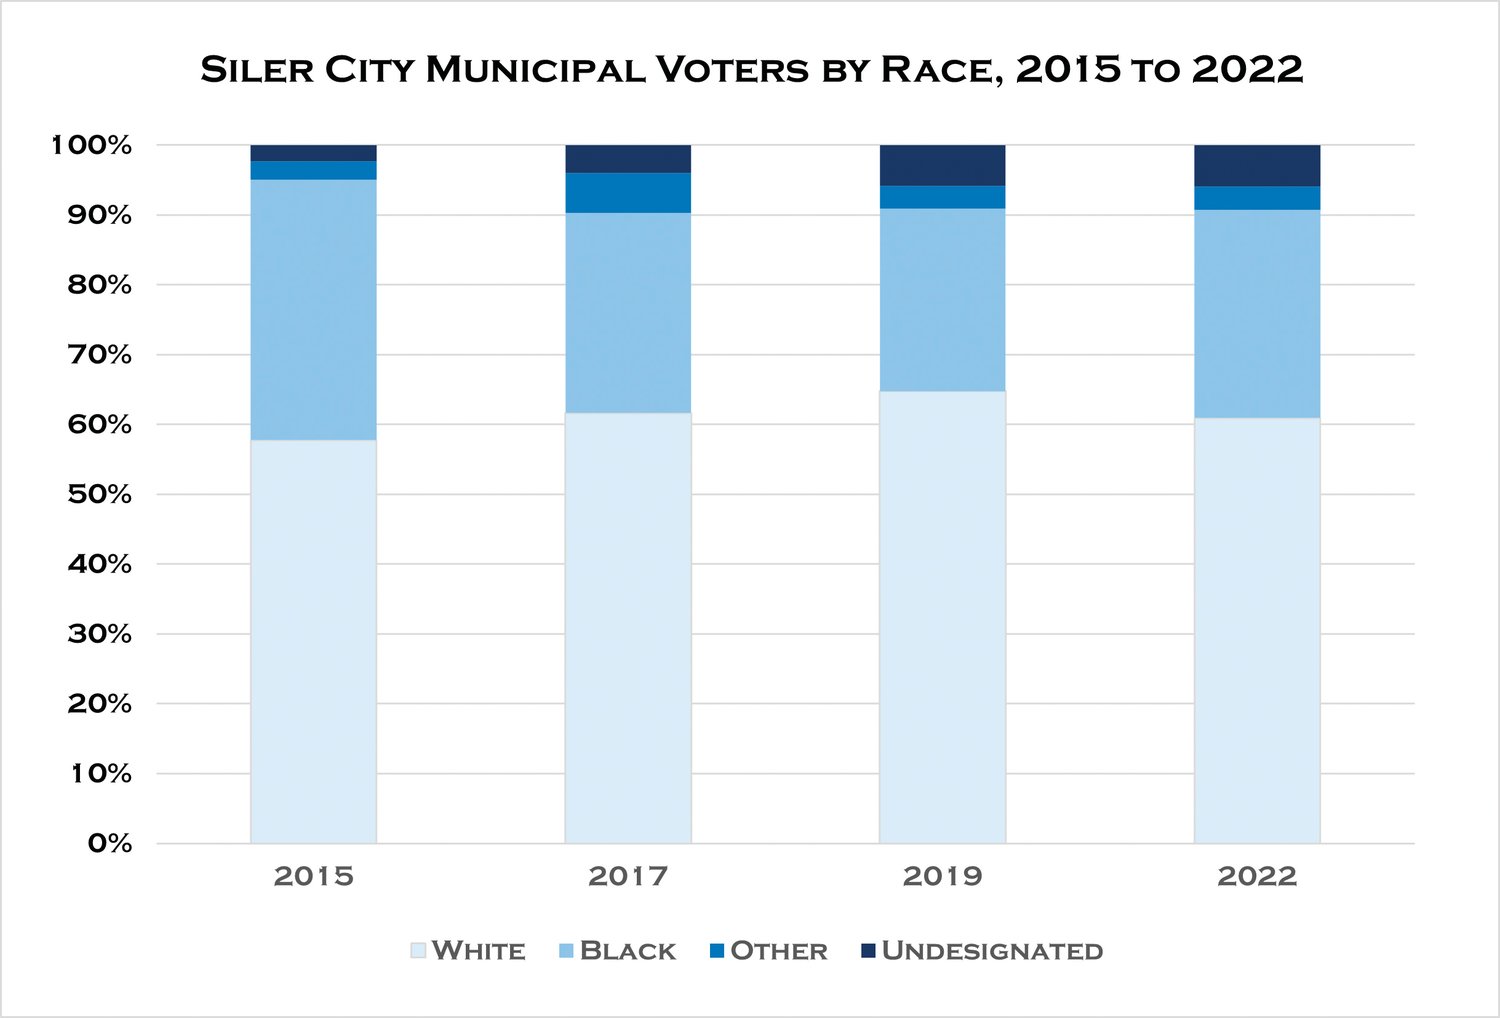 Most voters — 60.9% — in the 2022 town elections identified as white, matching prior voter demographics in the 2015, 2017 and 2019 town elections.